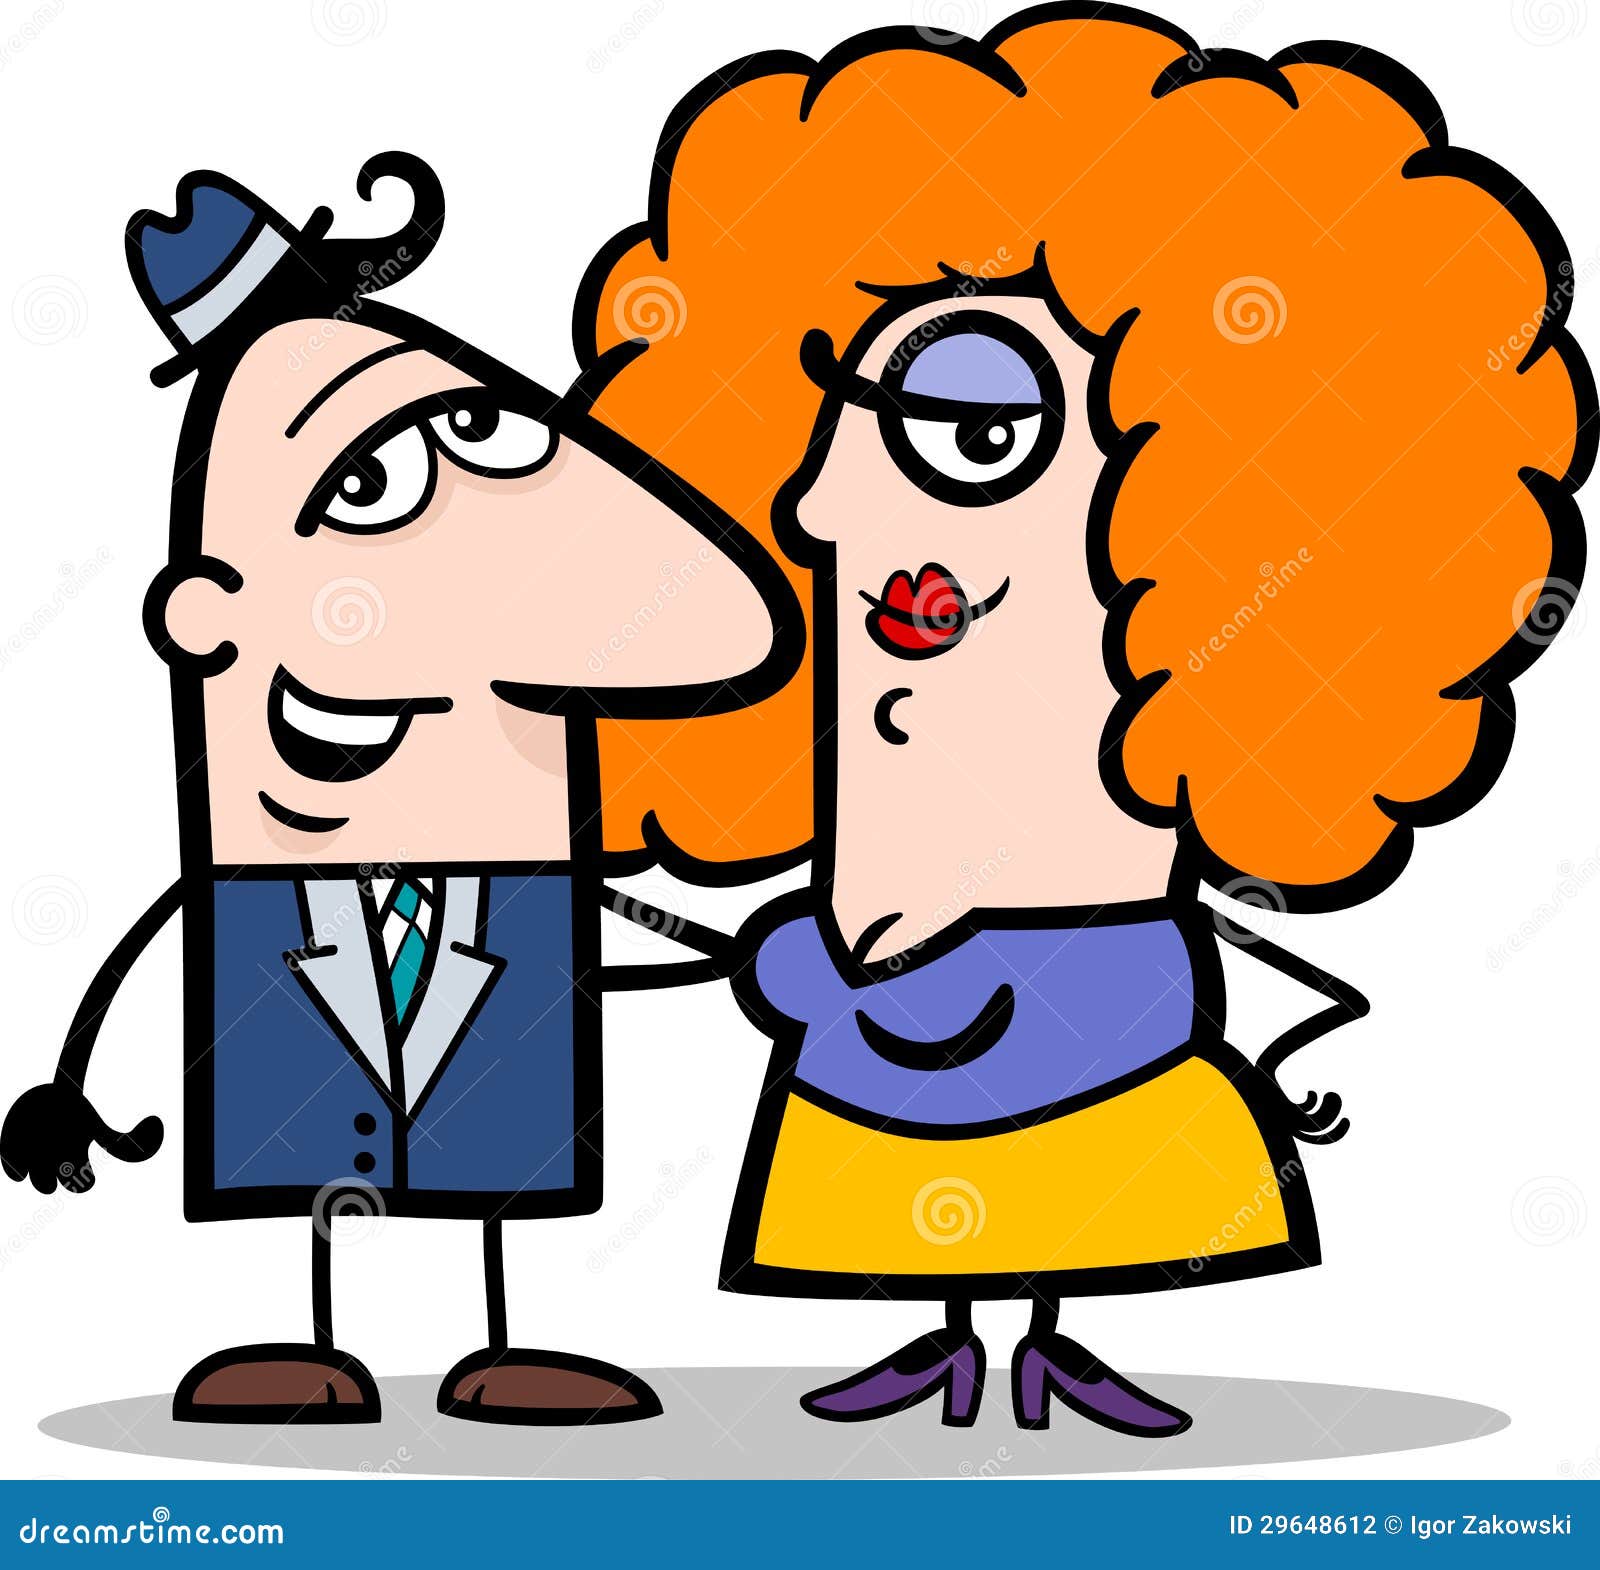 Funny Man and Woman Couple Cartoon Stock Vector - Illustration of ...